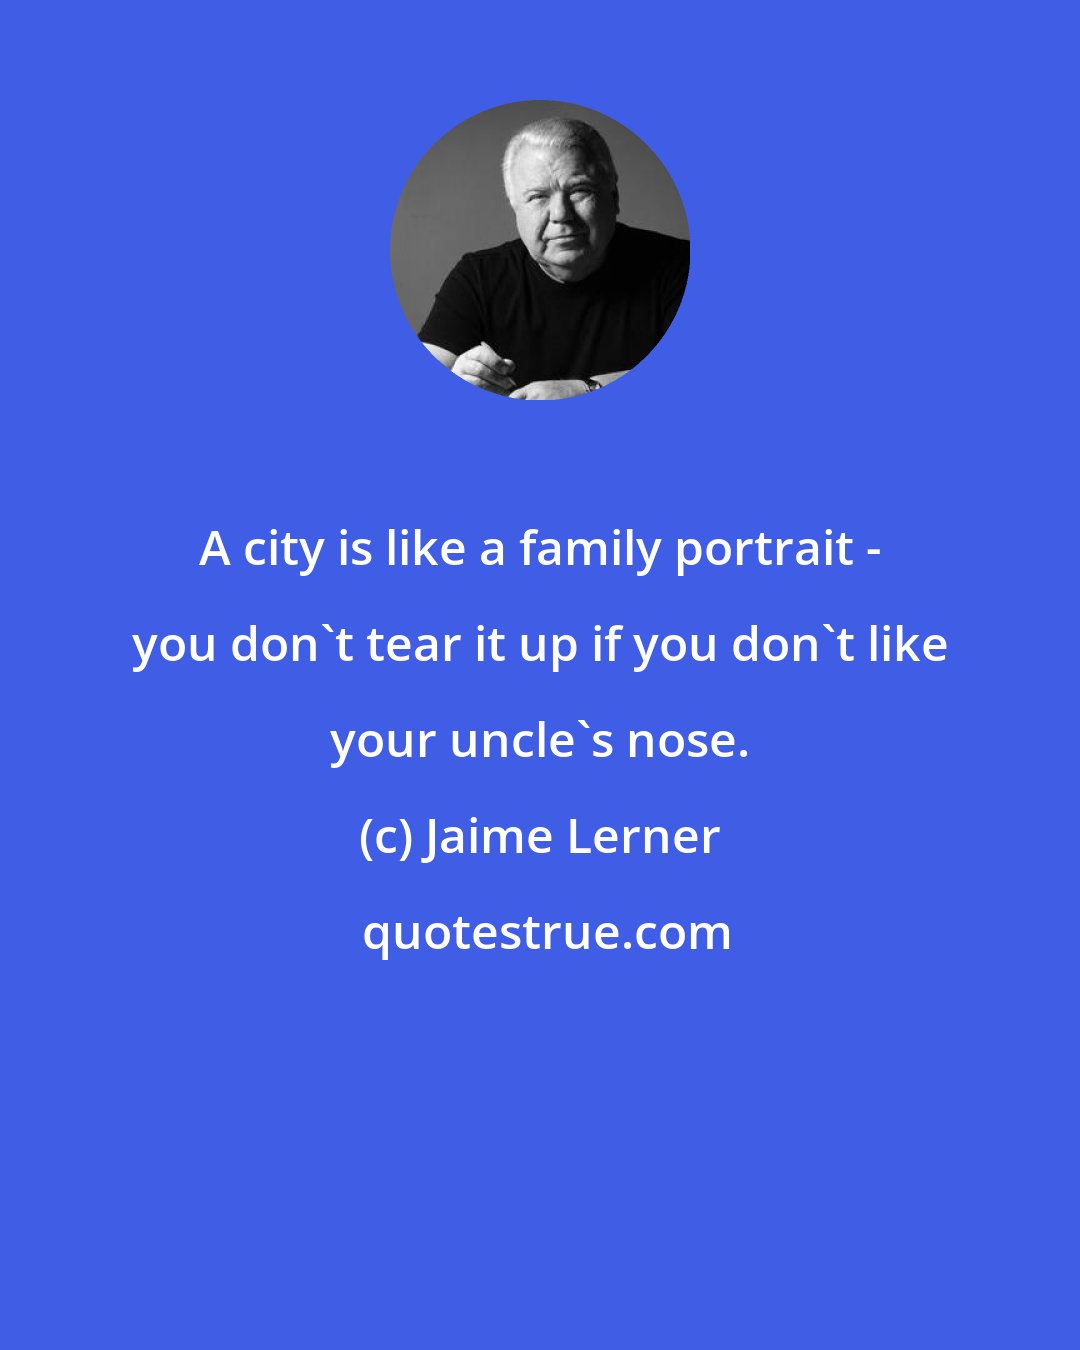 Jaime Lerner: A city is like a family portrait - you don't tear it up if you don't like your uncle's nose.